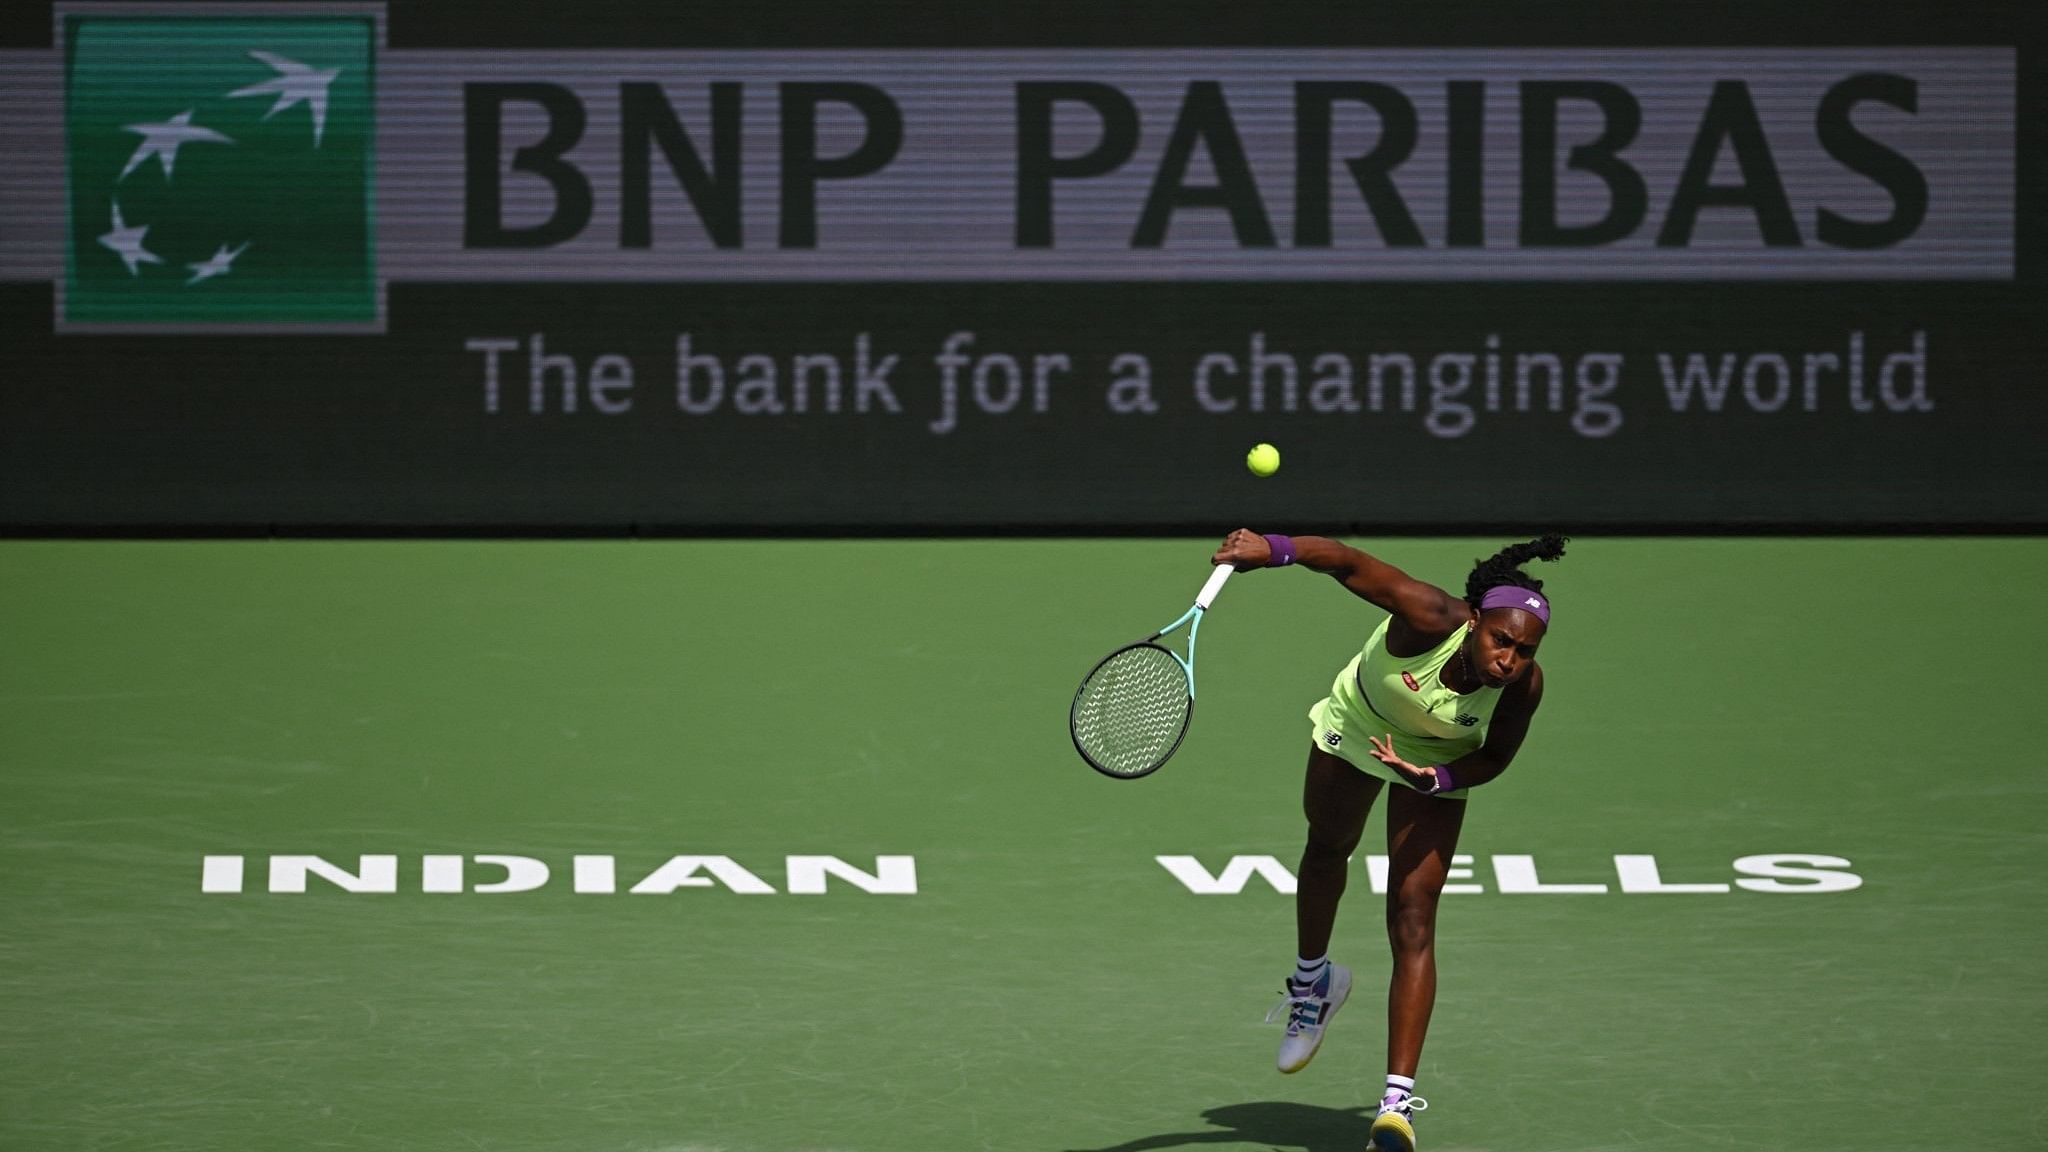 <div class="paragraphs"><p>Indian Wells, CA, USA; Coco Gauff (USA) hits a serve in her second round match against Clara Burel (FRA) during the BNP Paribas Open at Indian Wells Tennis Garden. </p></div>